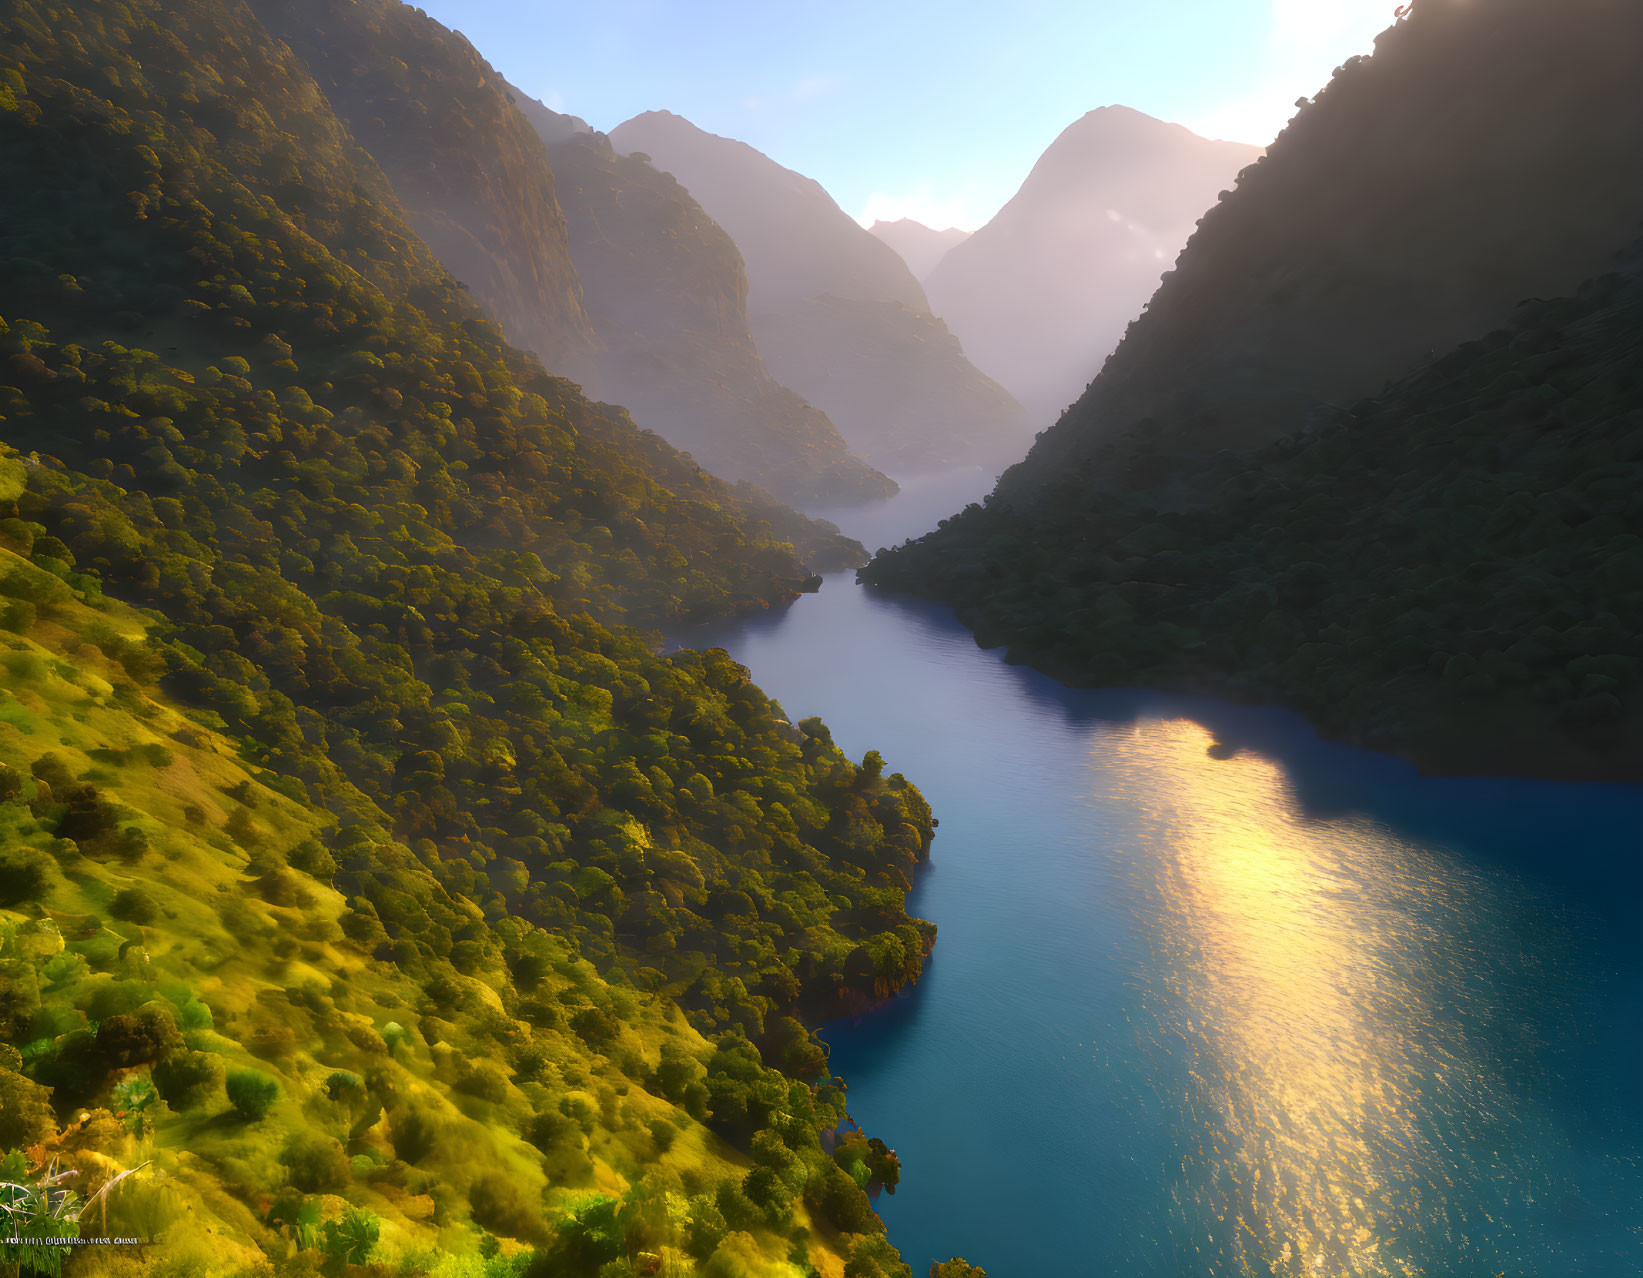 Tranquil sunrise over lush green mountain valley